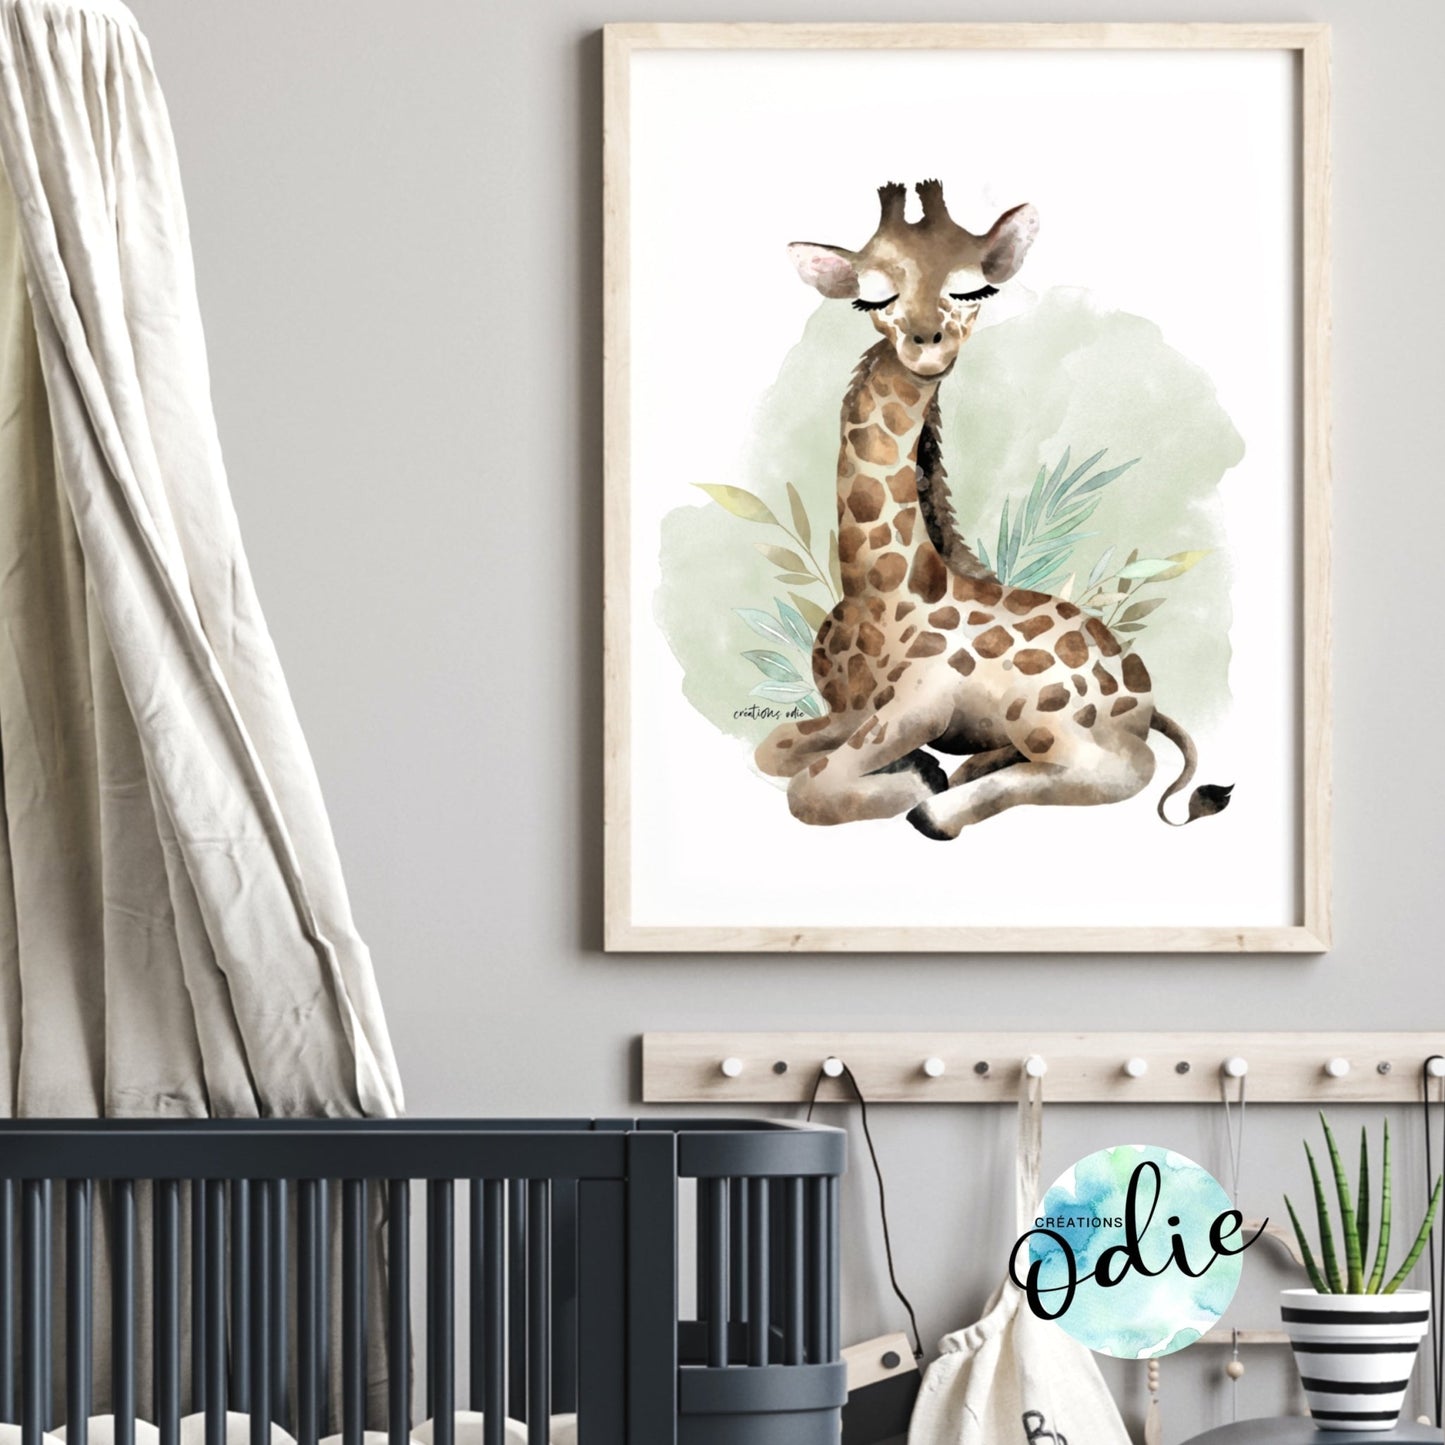 Affiche - Girafe - Affiche - Créations Odie